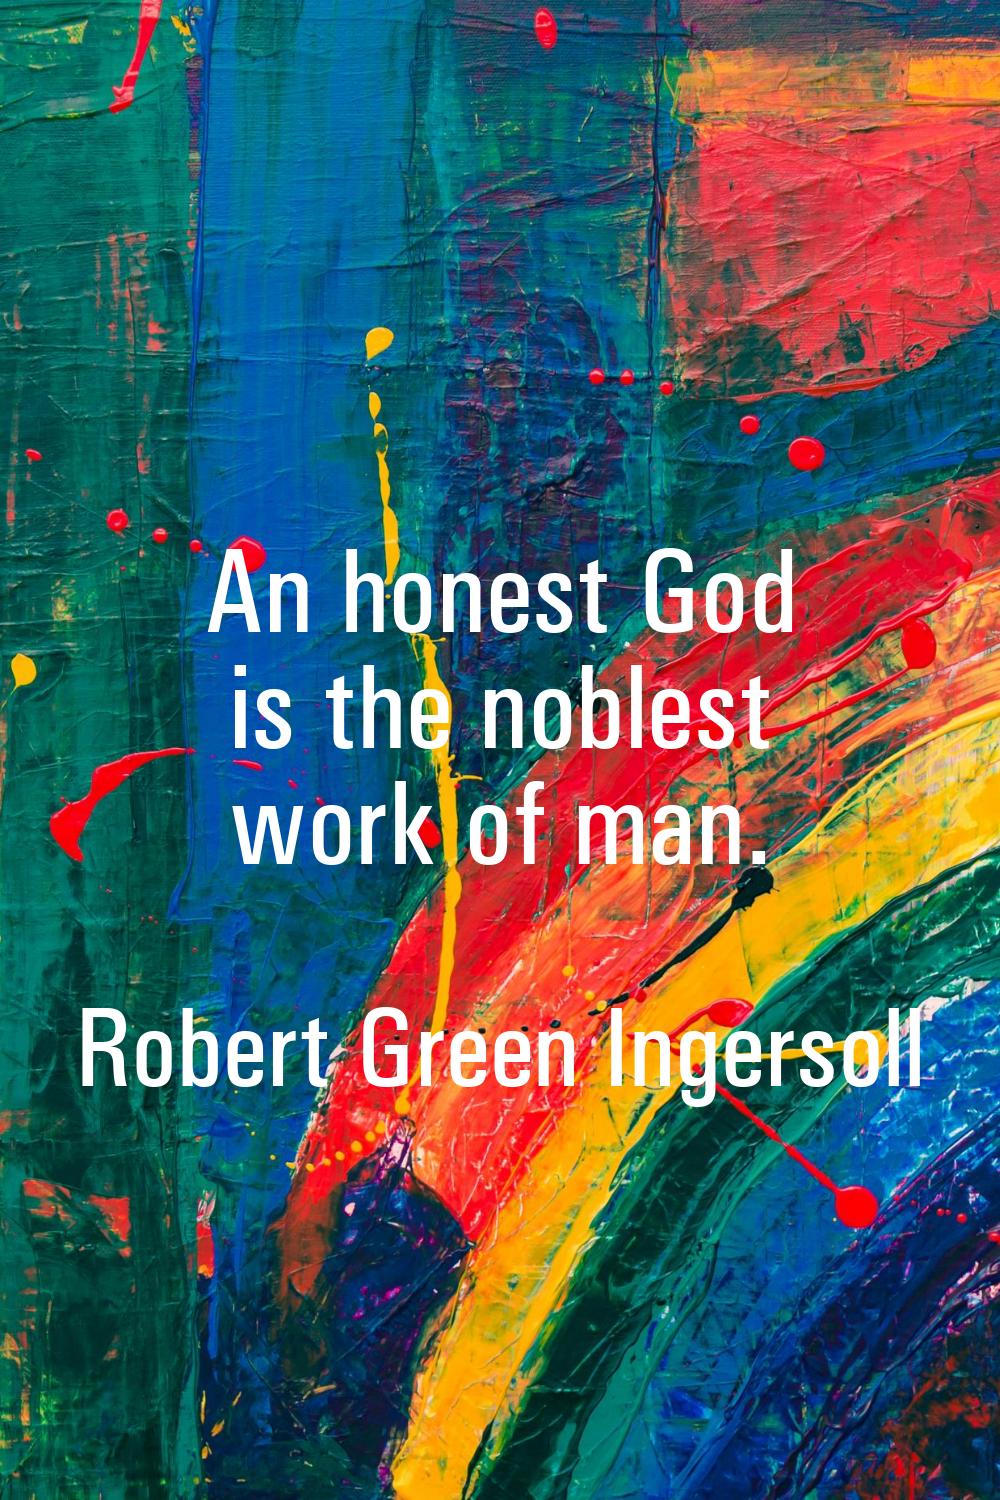 An honest God is the noblest work of man.